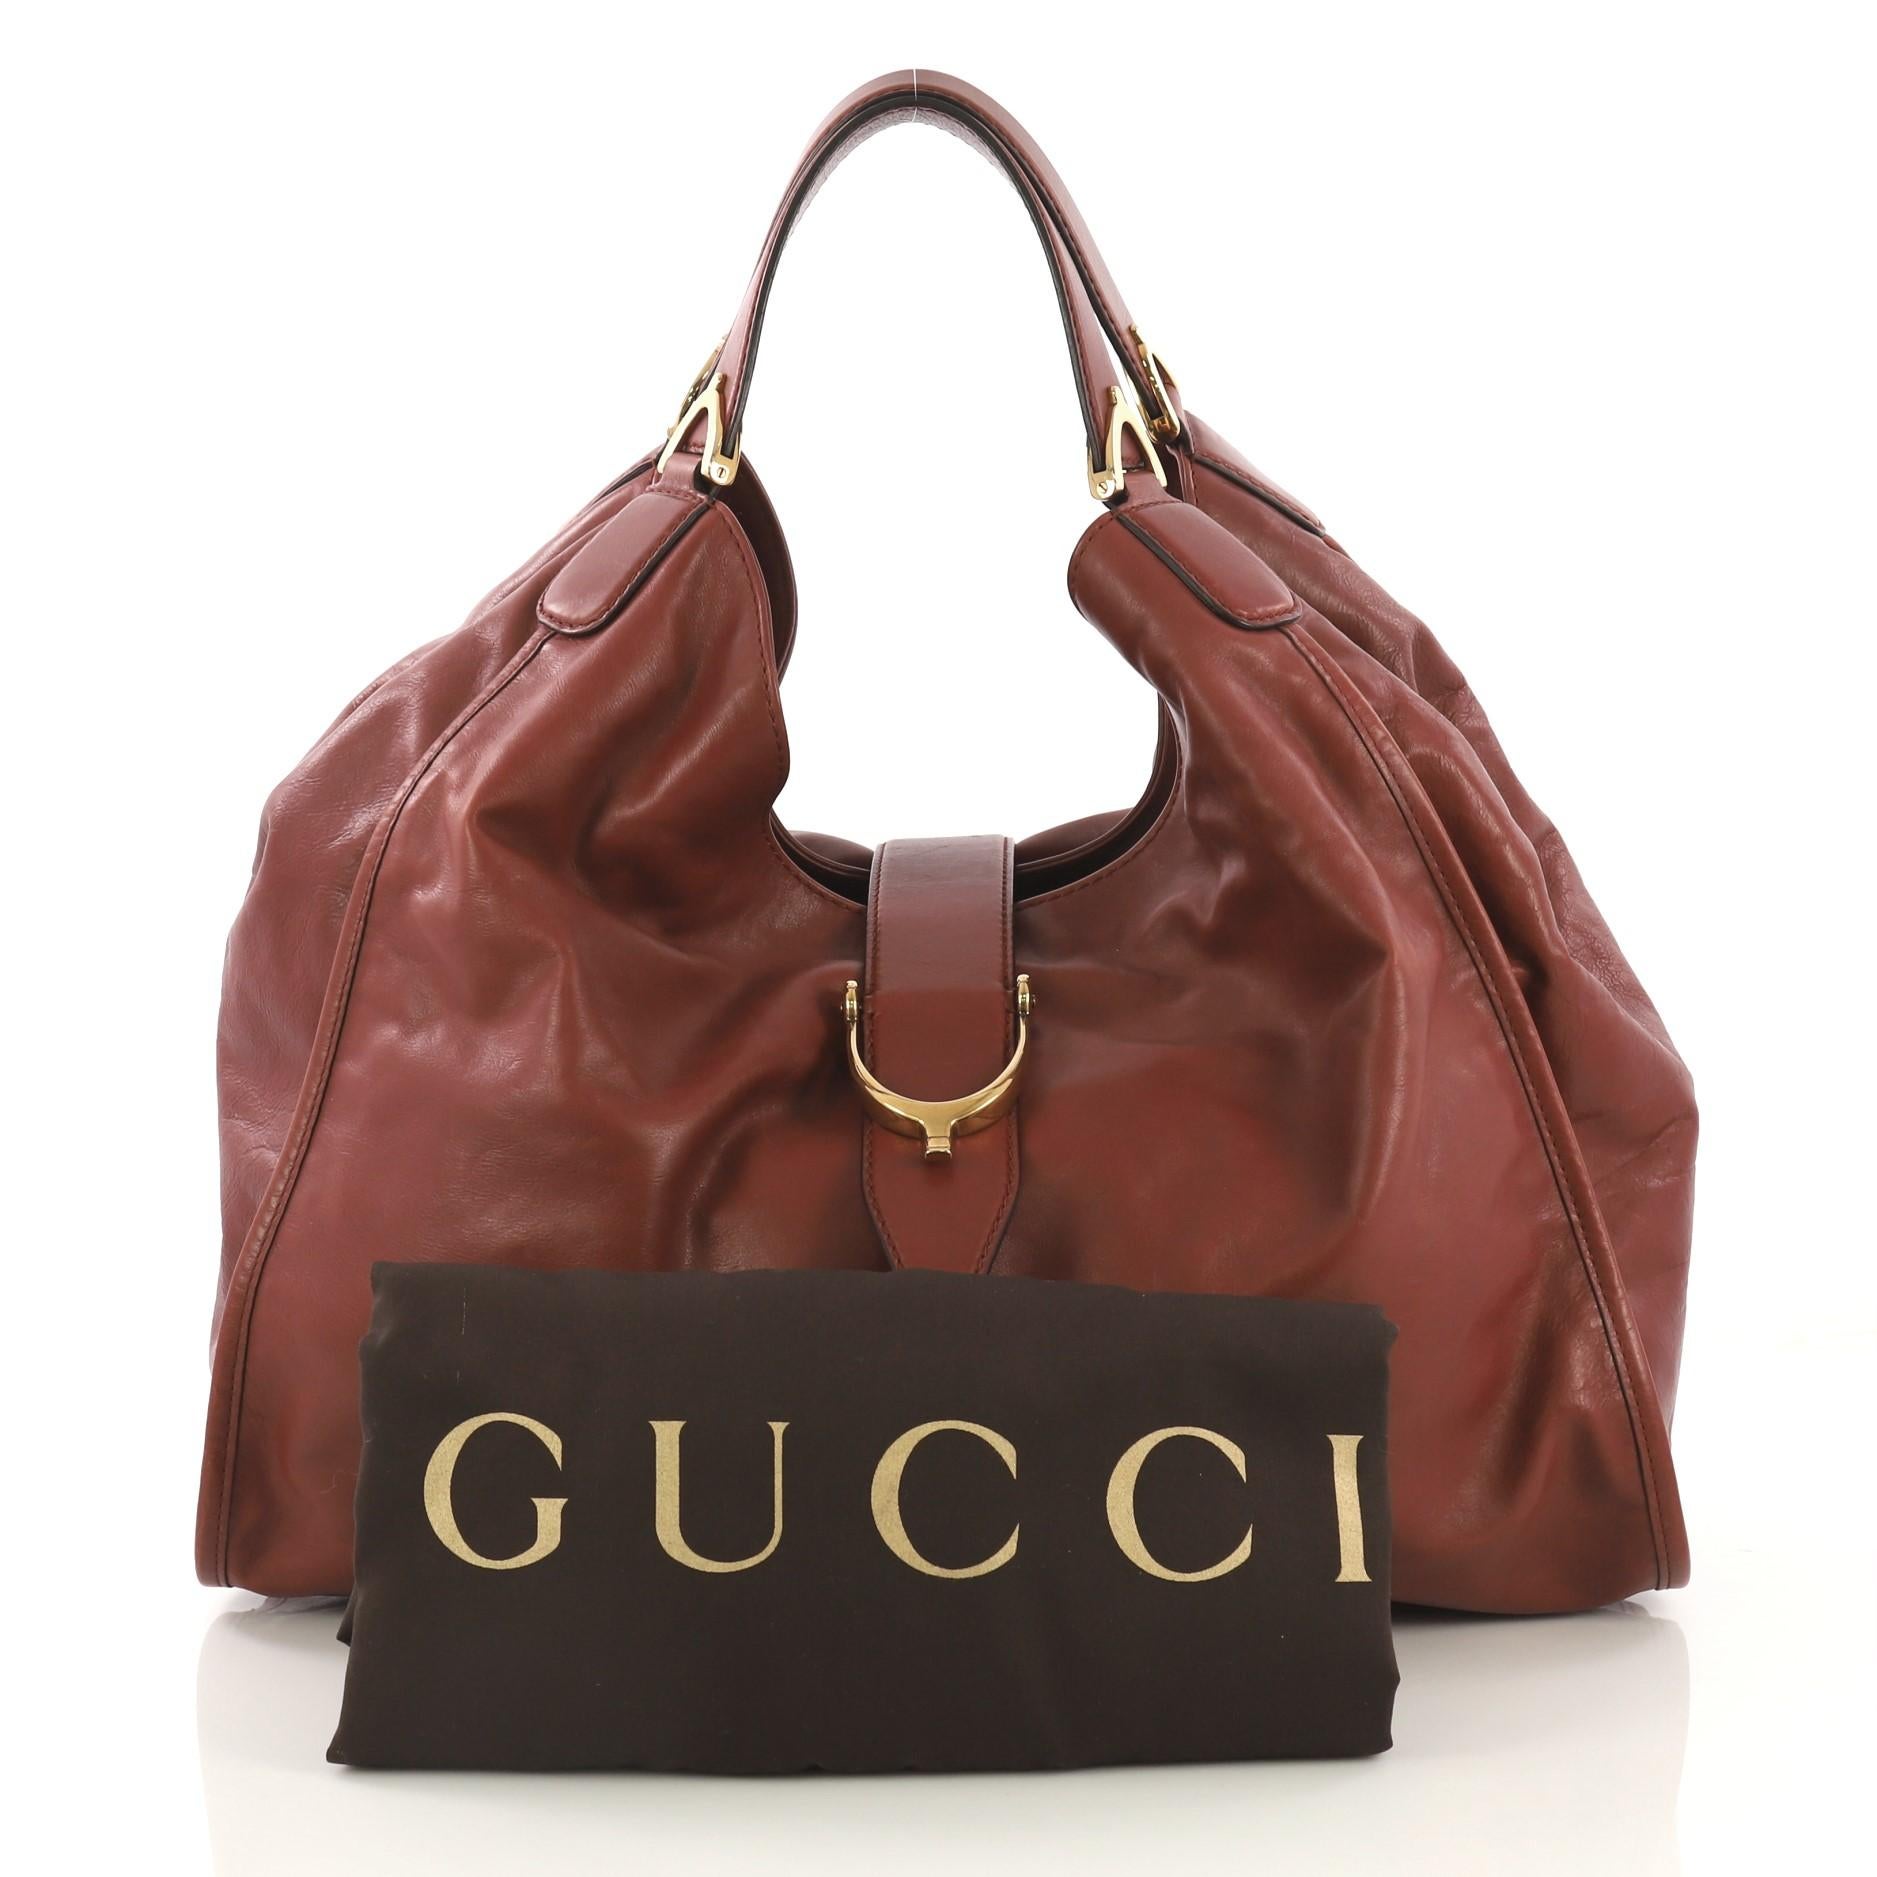 This Gucci Soft Stirrup Tote Leather Large, crafted from dark red leather, features dual flat handles with spur detailing and gold-tone hardware. Its slide flap closure opens to a beige fabric interior with side zip and slip pockets. 

Estimated